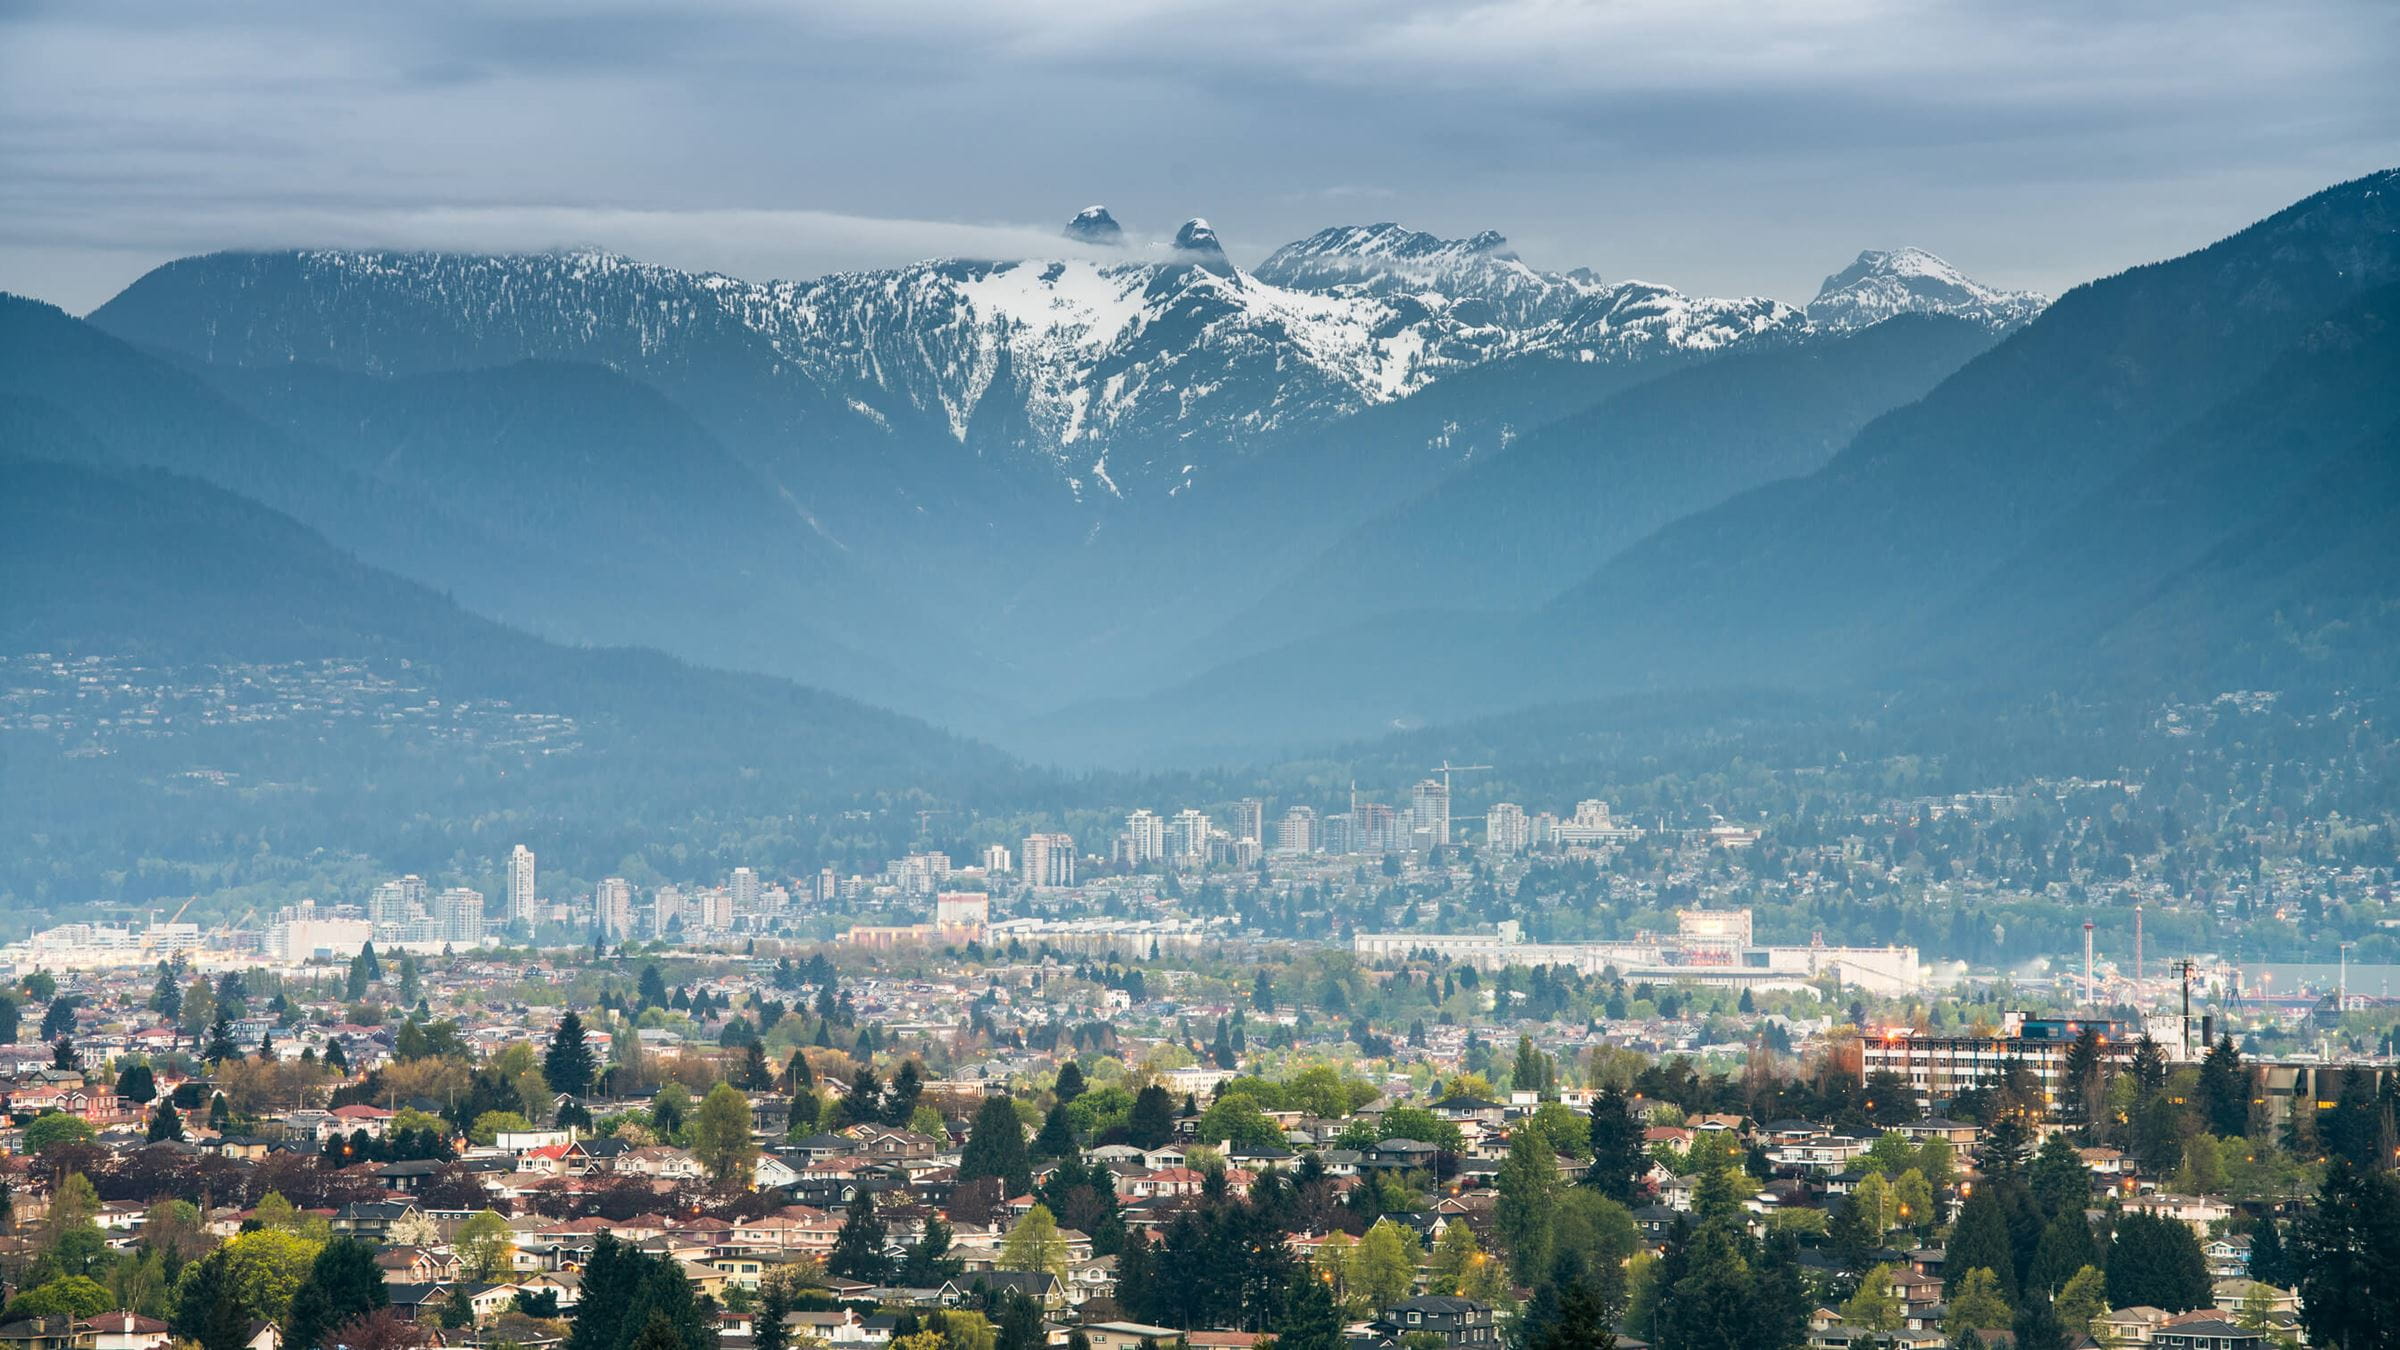 View across Vancouver to the mountains